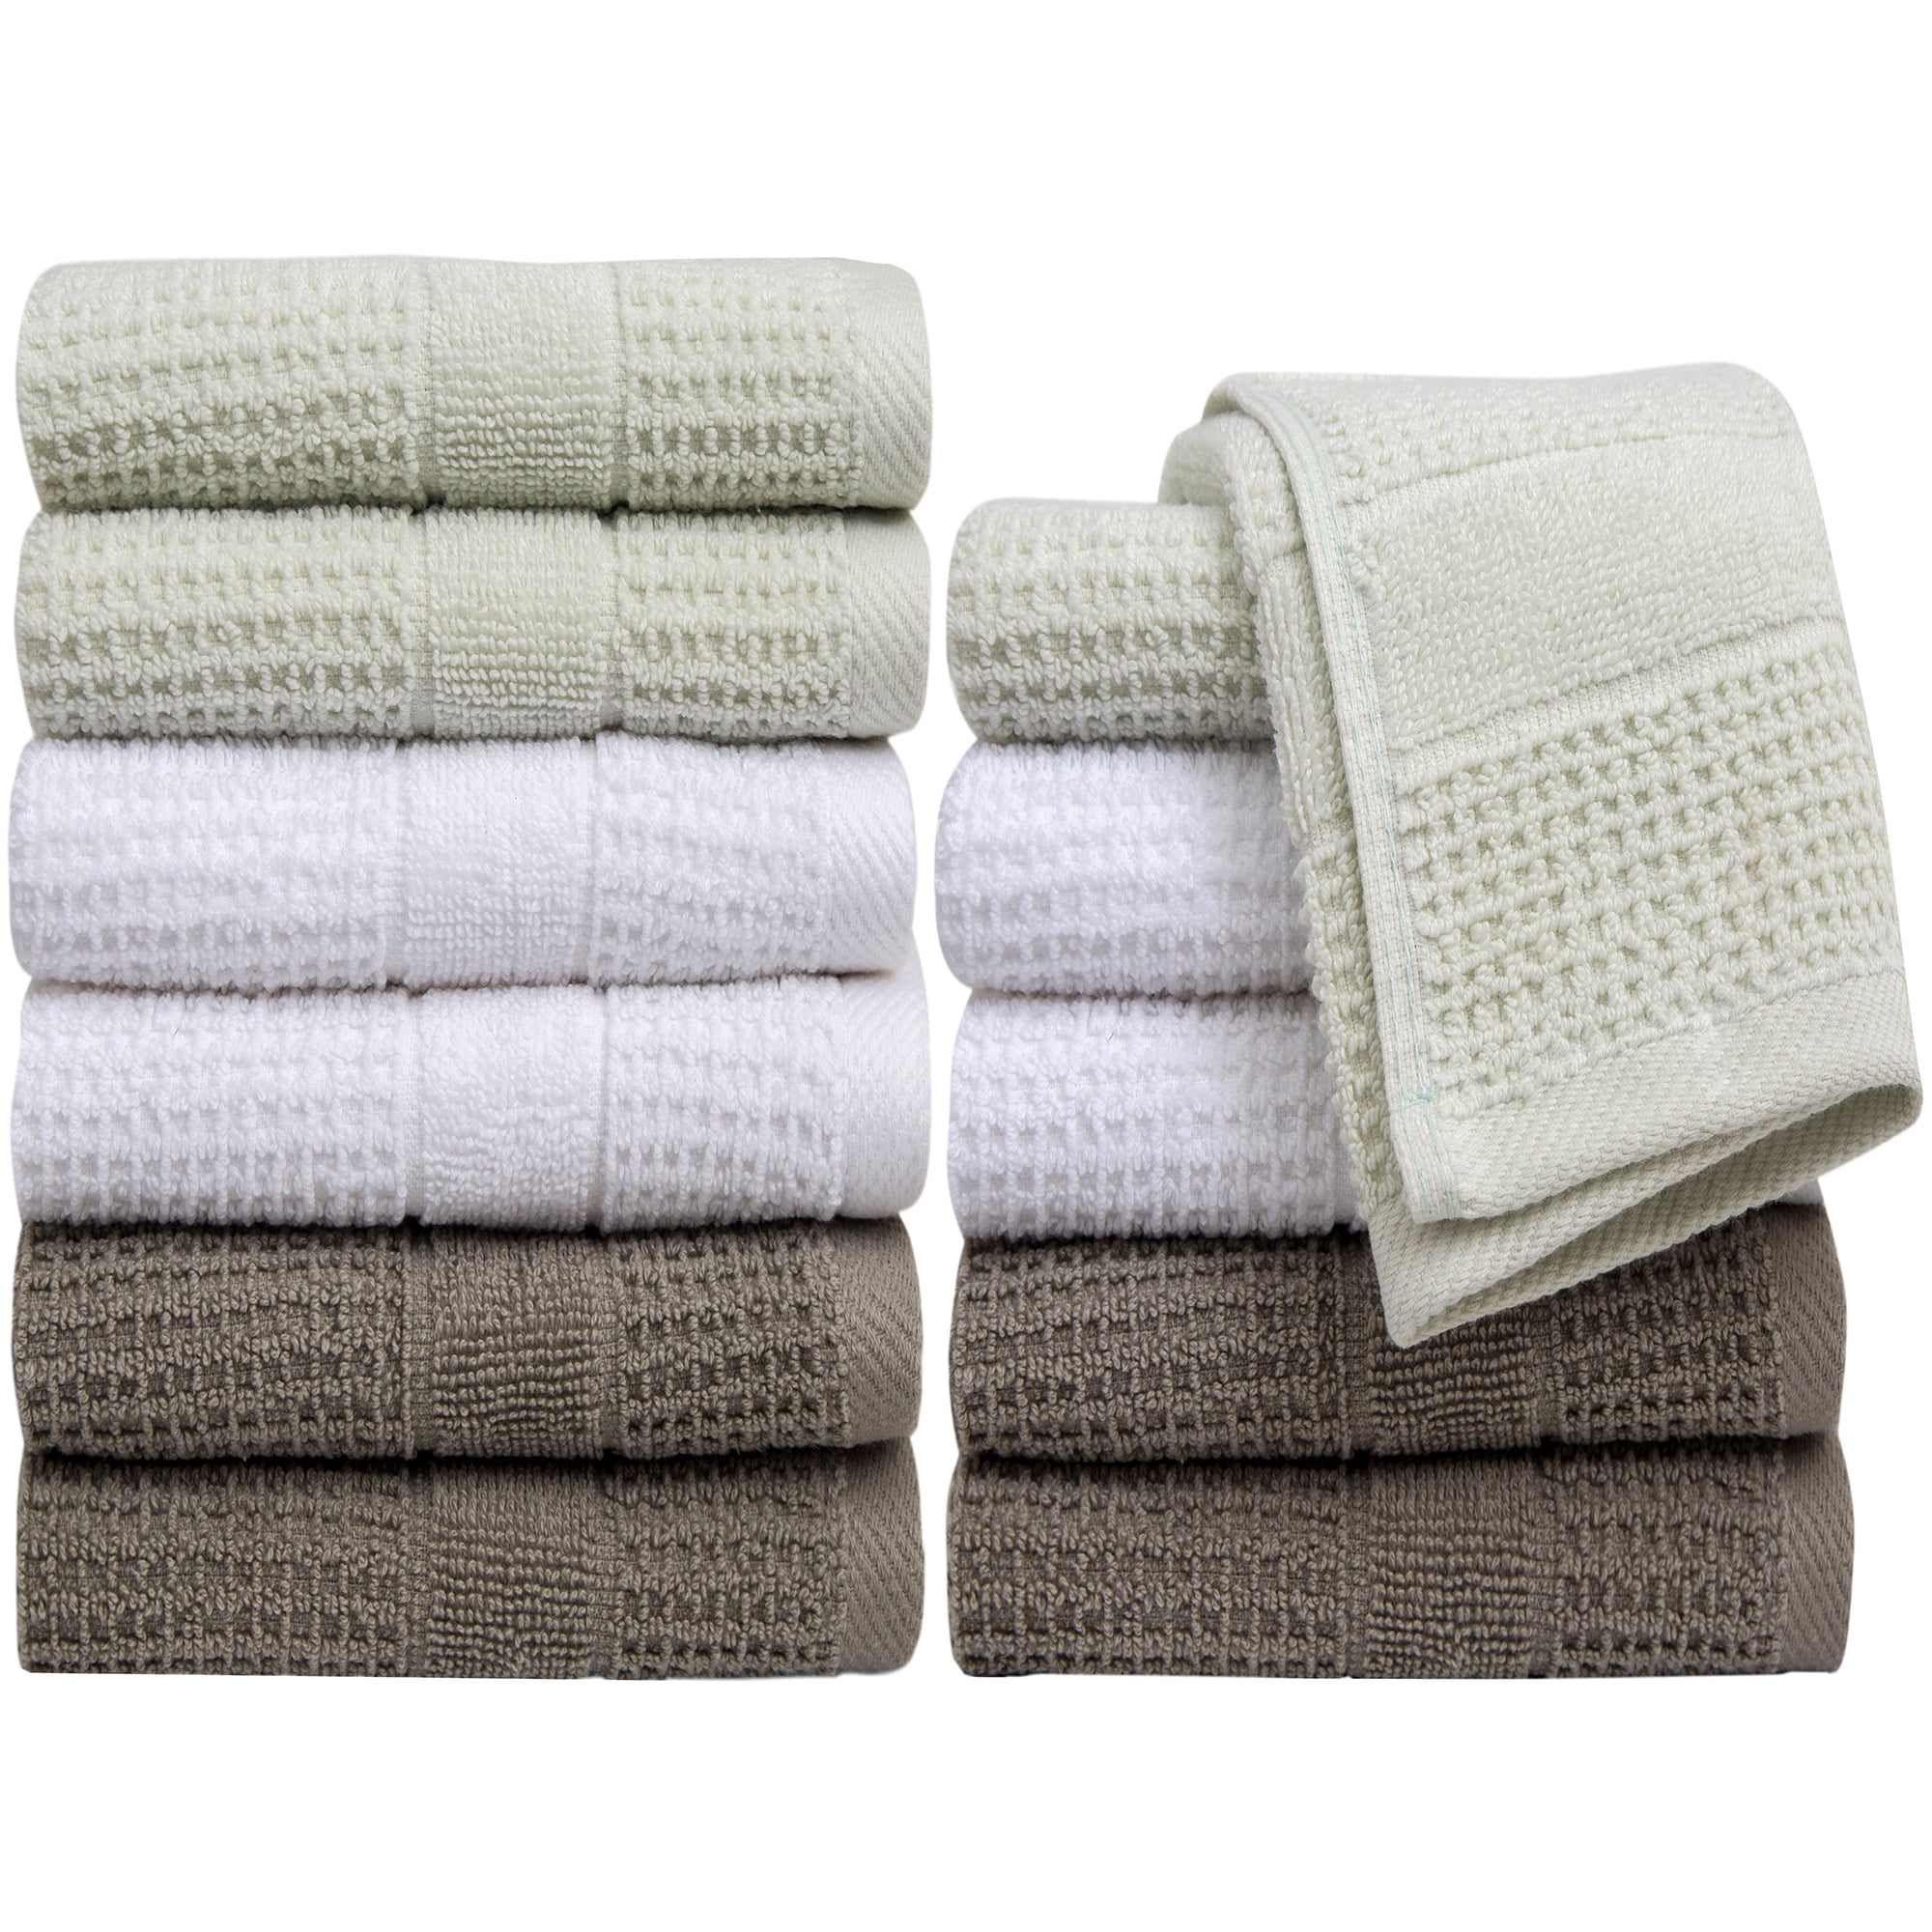 Pleasant Home Washcloths Set 12 Pack Super Soft and Highly Absorbent Face Towels Grey, Popcorn Design – 488 GSM- 100% Ring Spun Cotton Wash Cloth 12” x 12” 